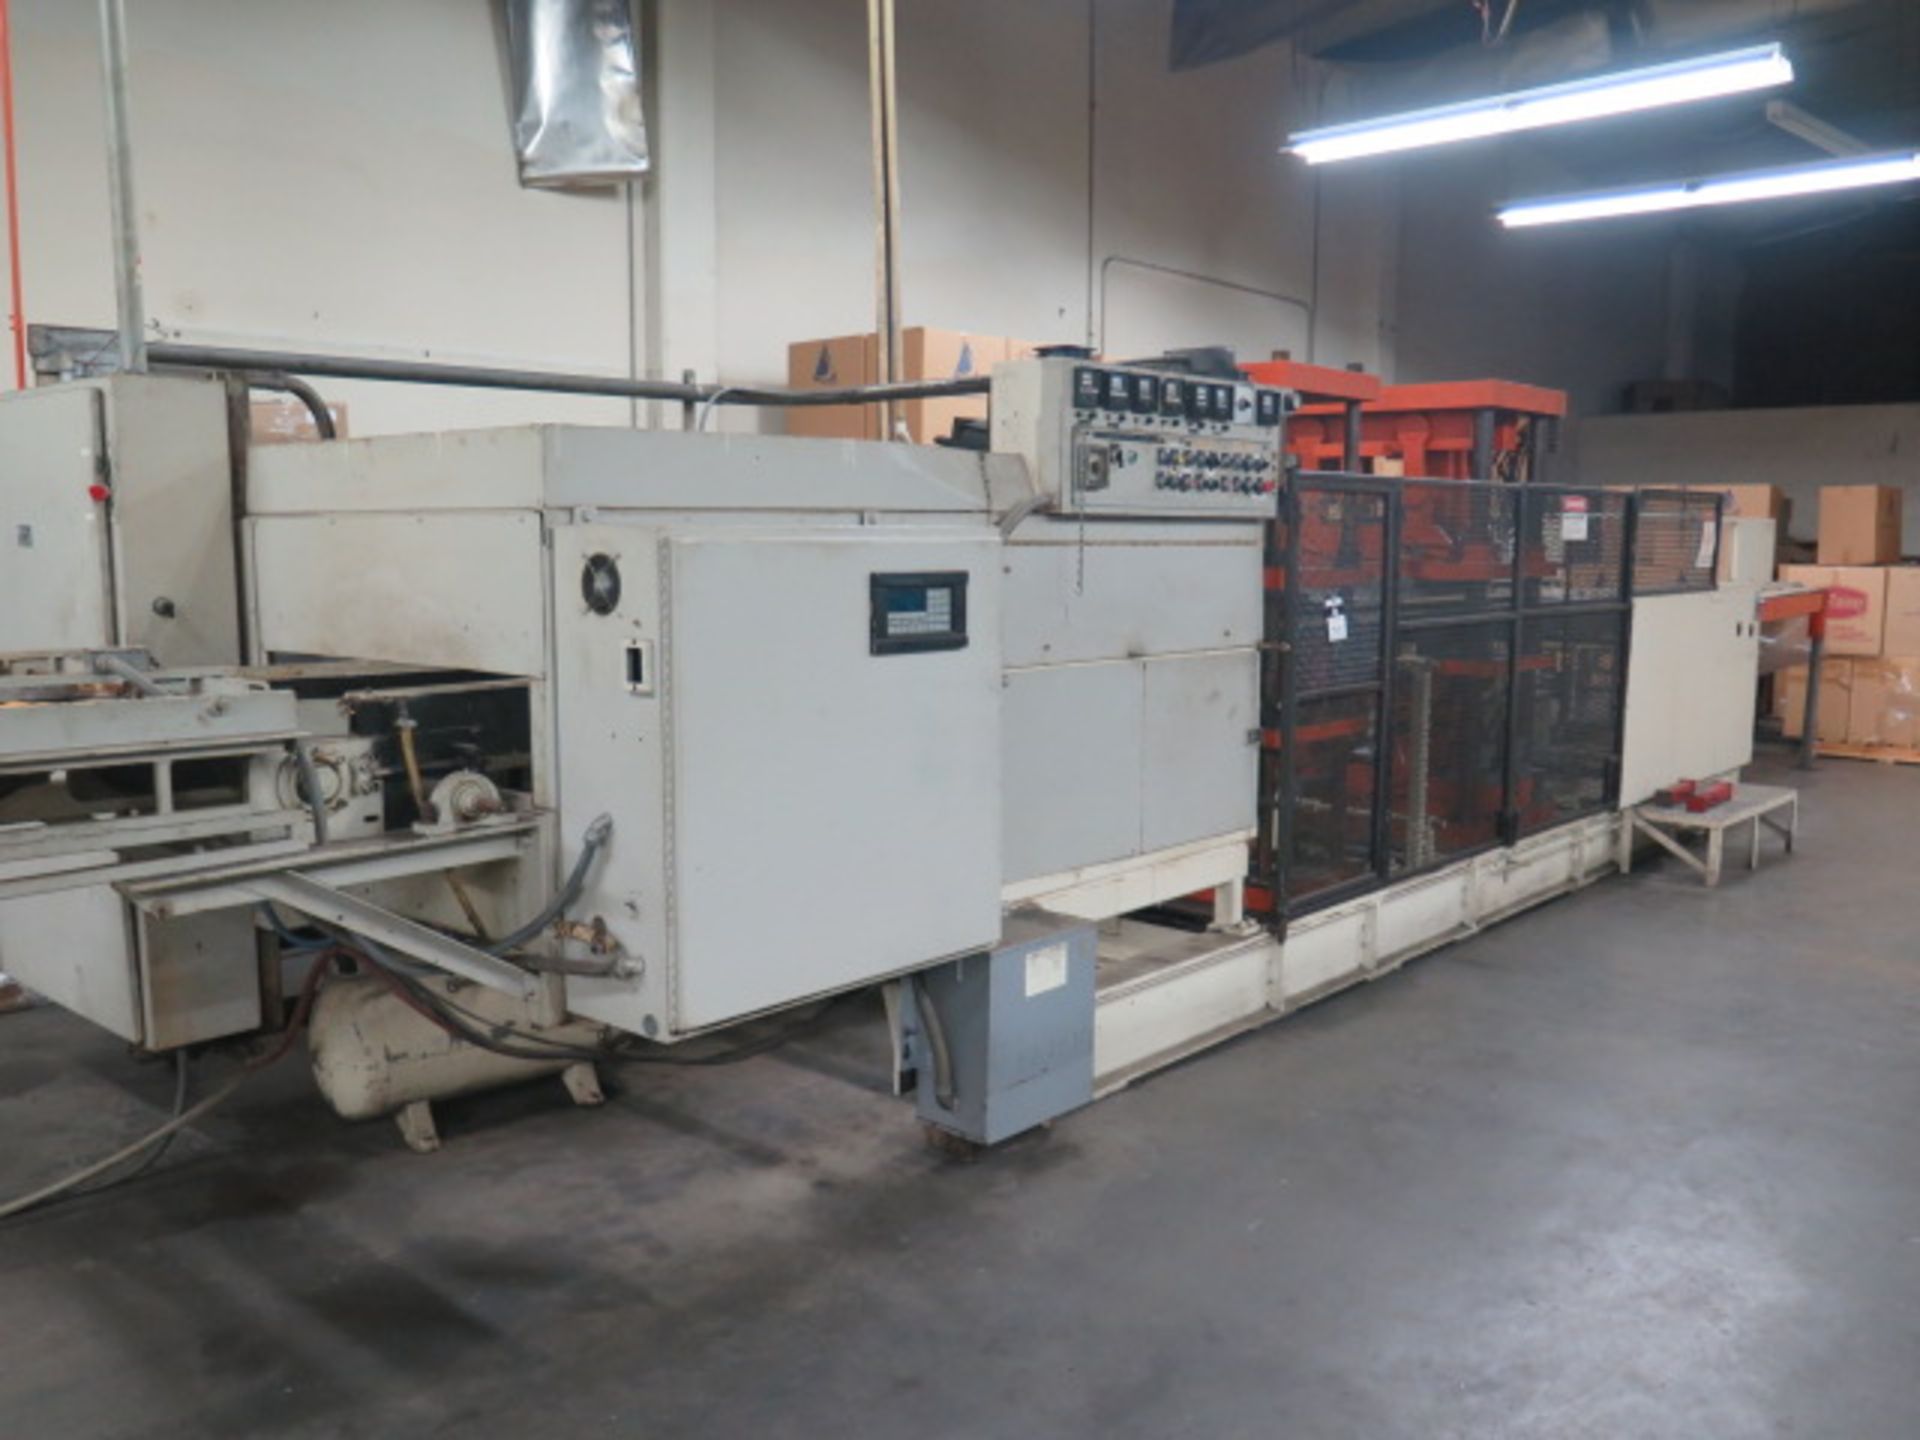 Packaging Industries mdl. 2300 Thermoforming Machine s/n 270-094-80 w/ Digital Controls, SOLD AS IS